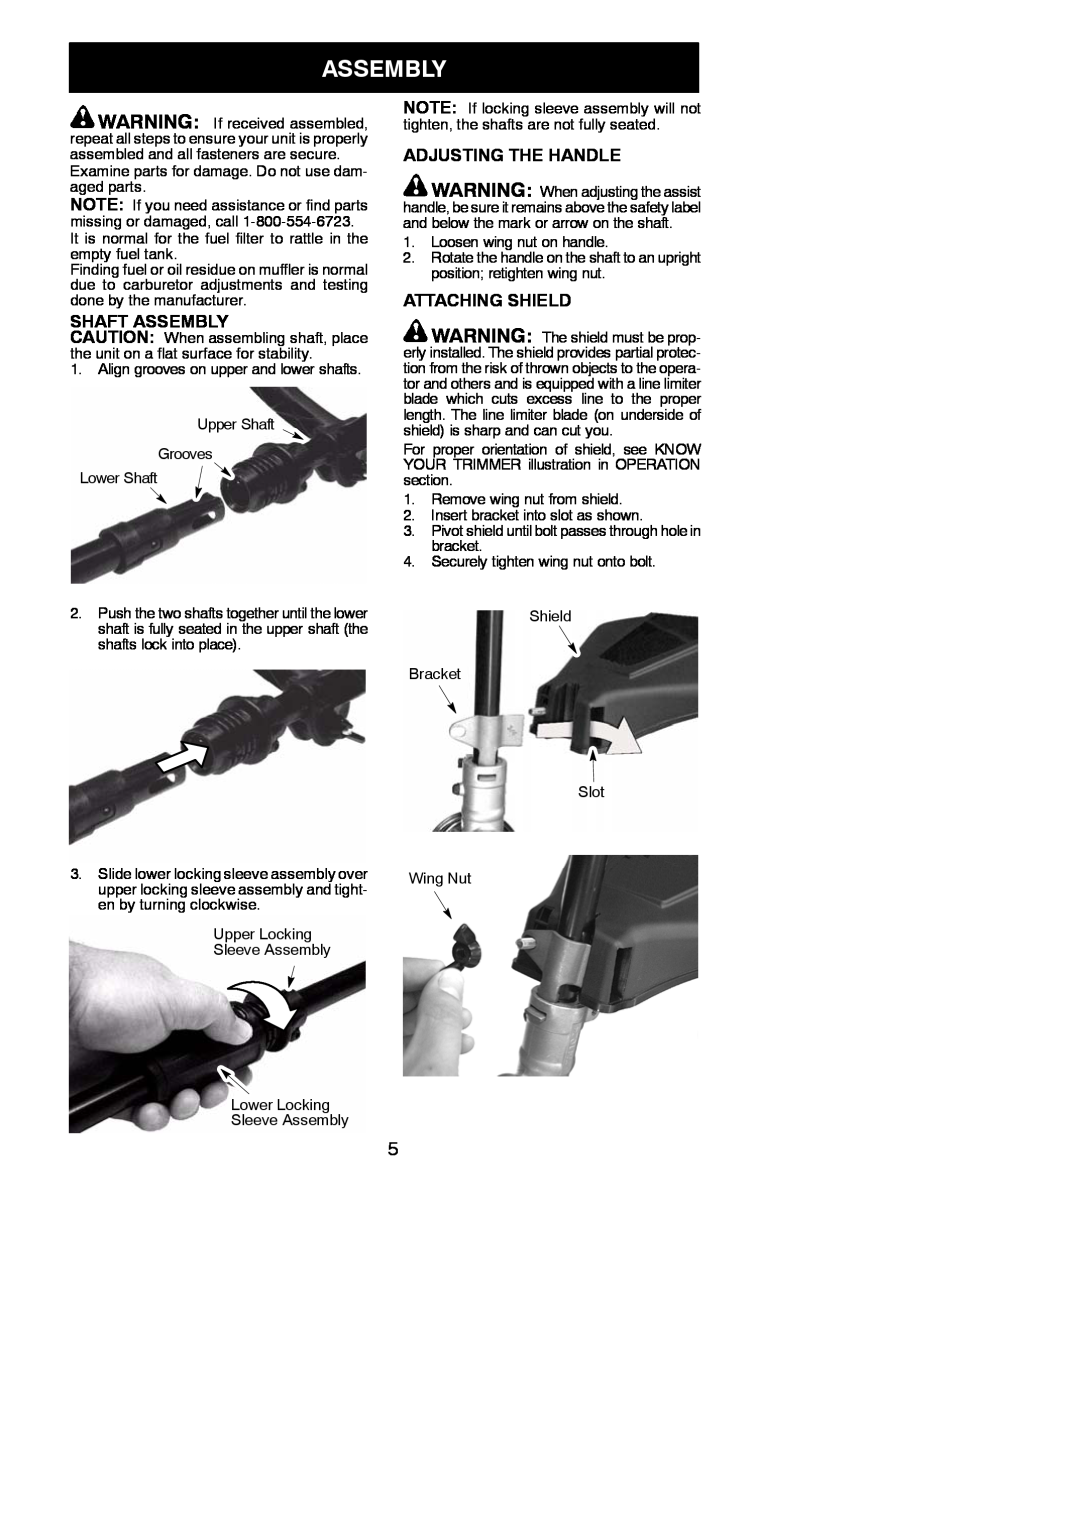 Weed Eater 545186797, SST25C instruction manual Shaft Assembly, Adjusting The Handle, Attaching Shield 